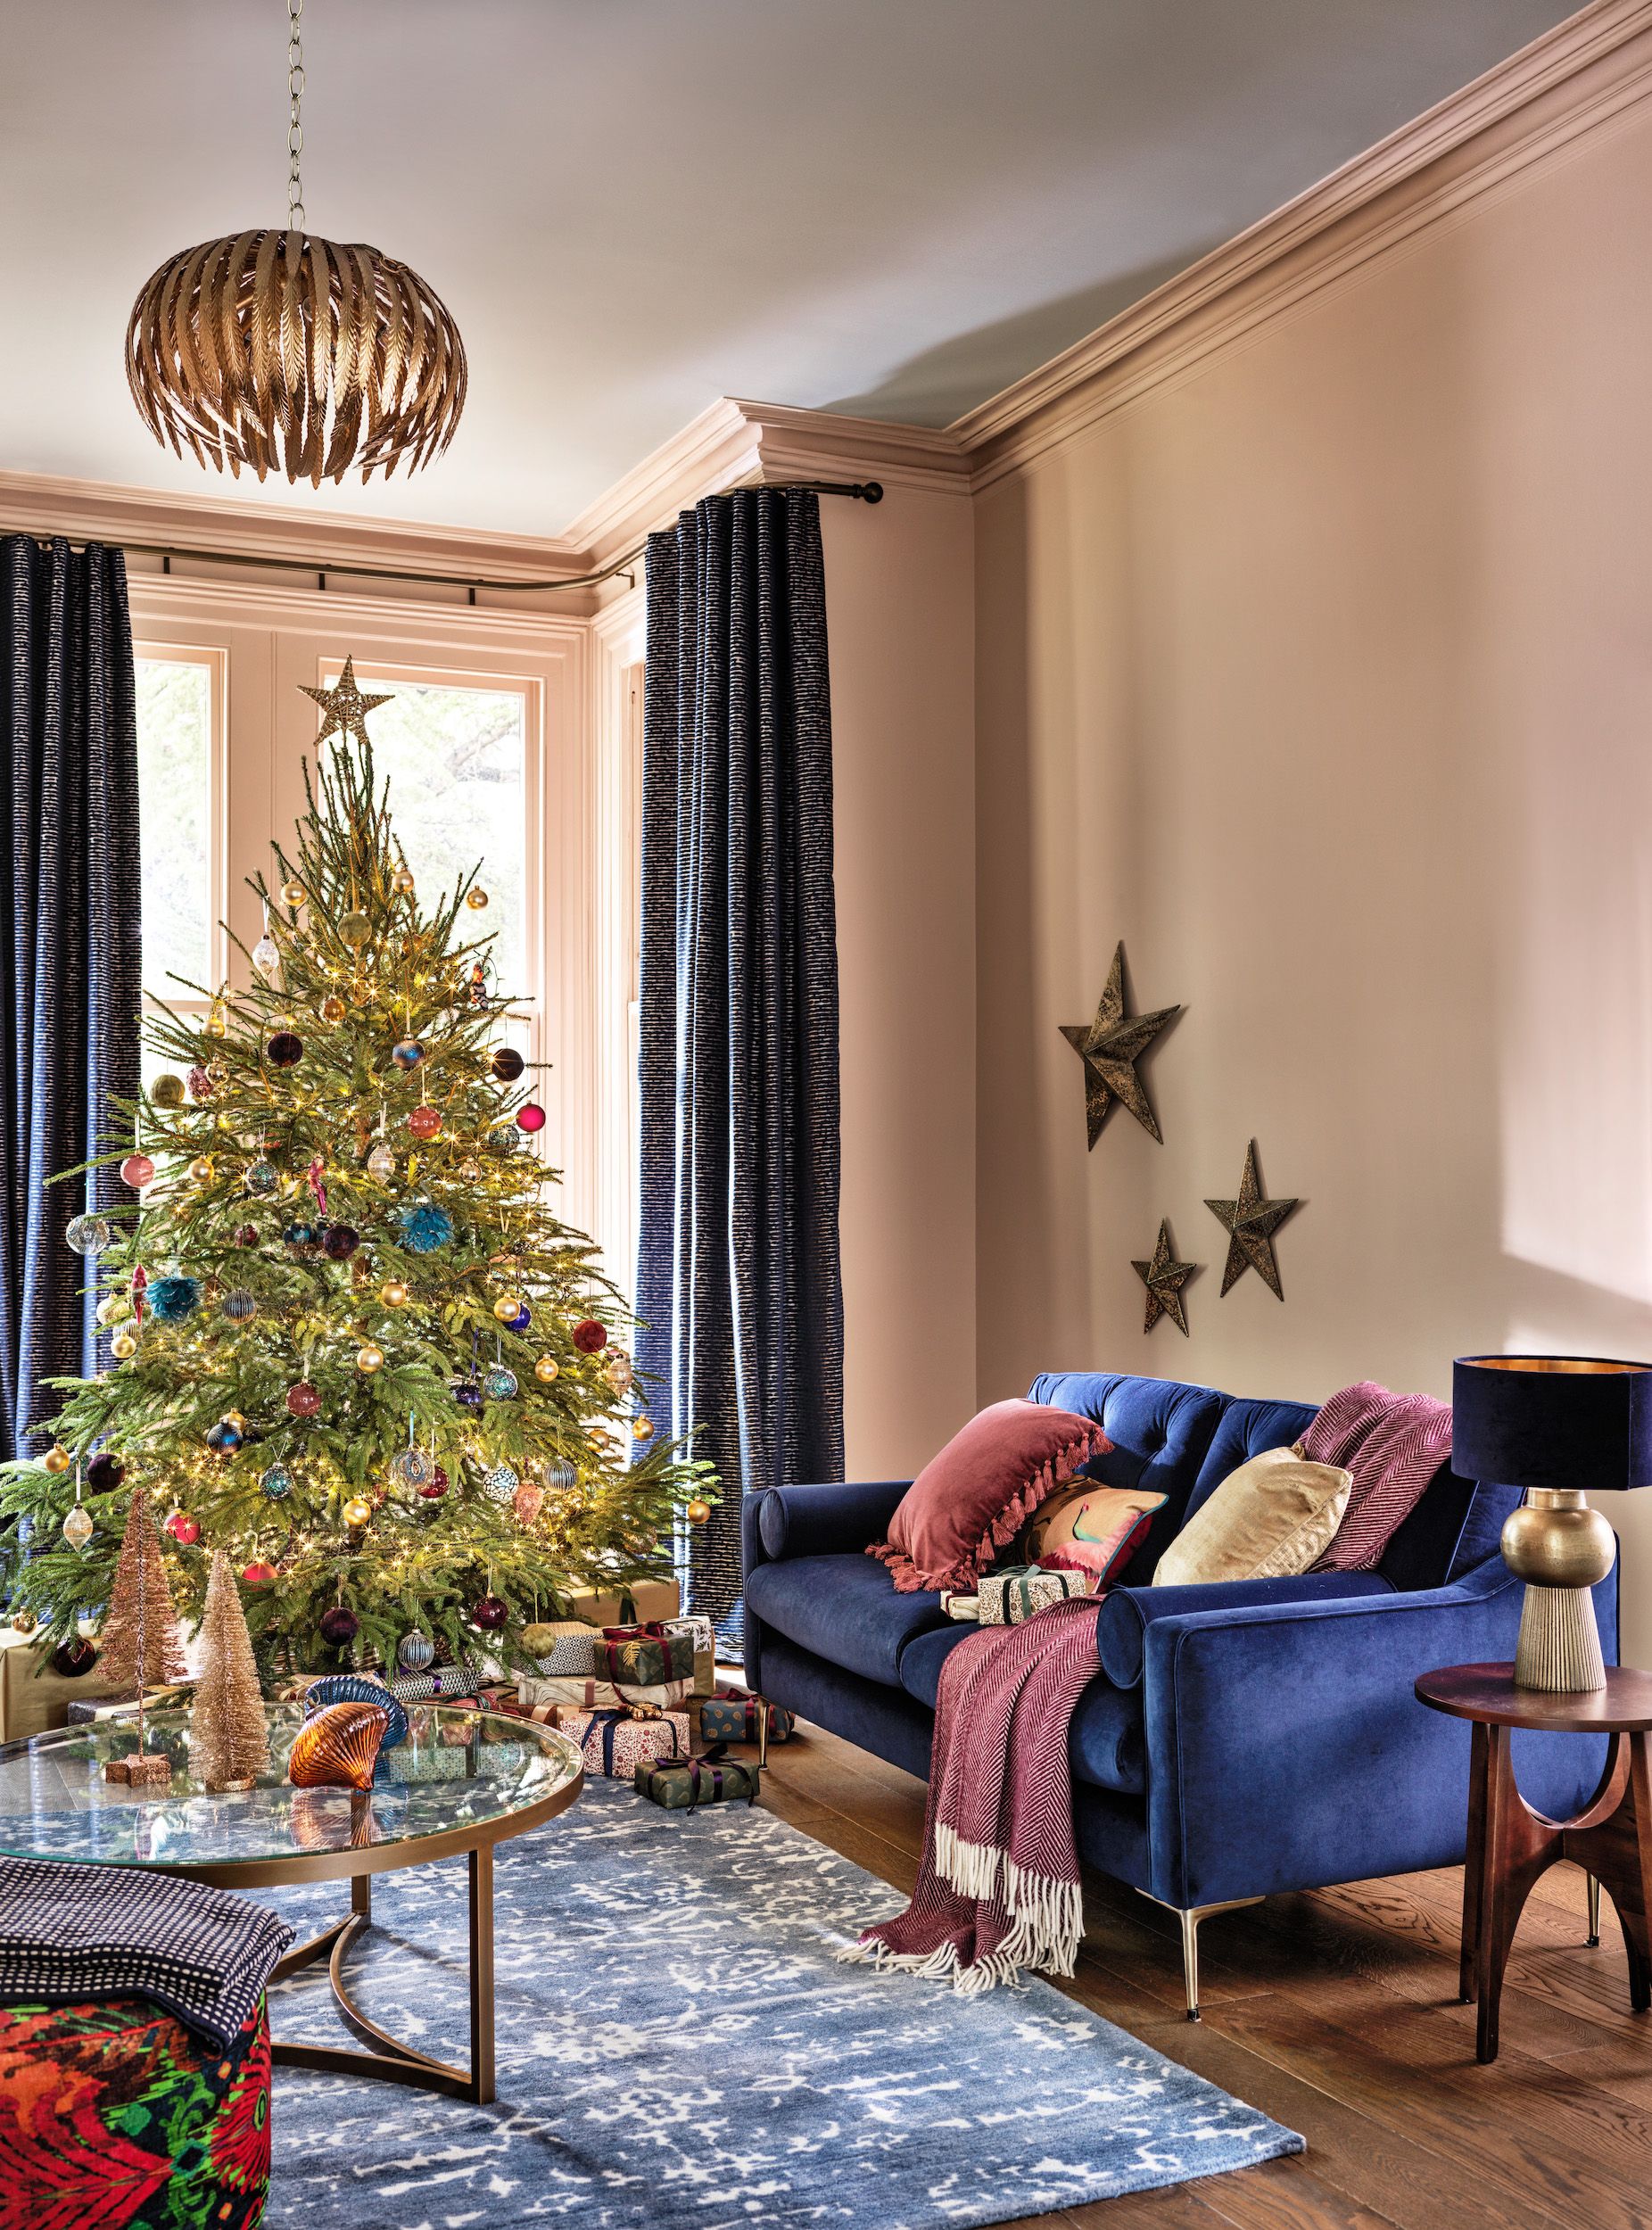 When to Take Your Christmas Tree Down, According to Experts